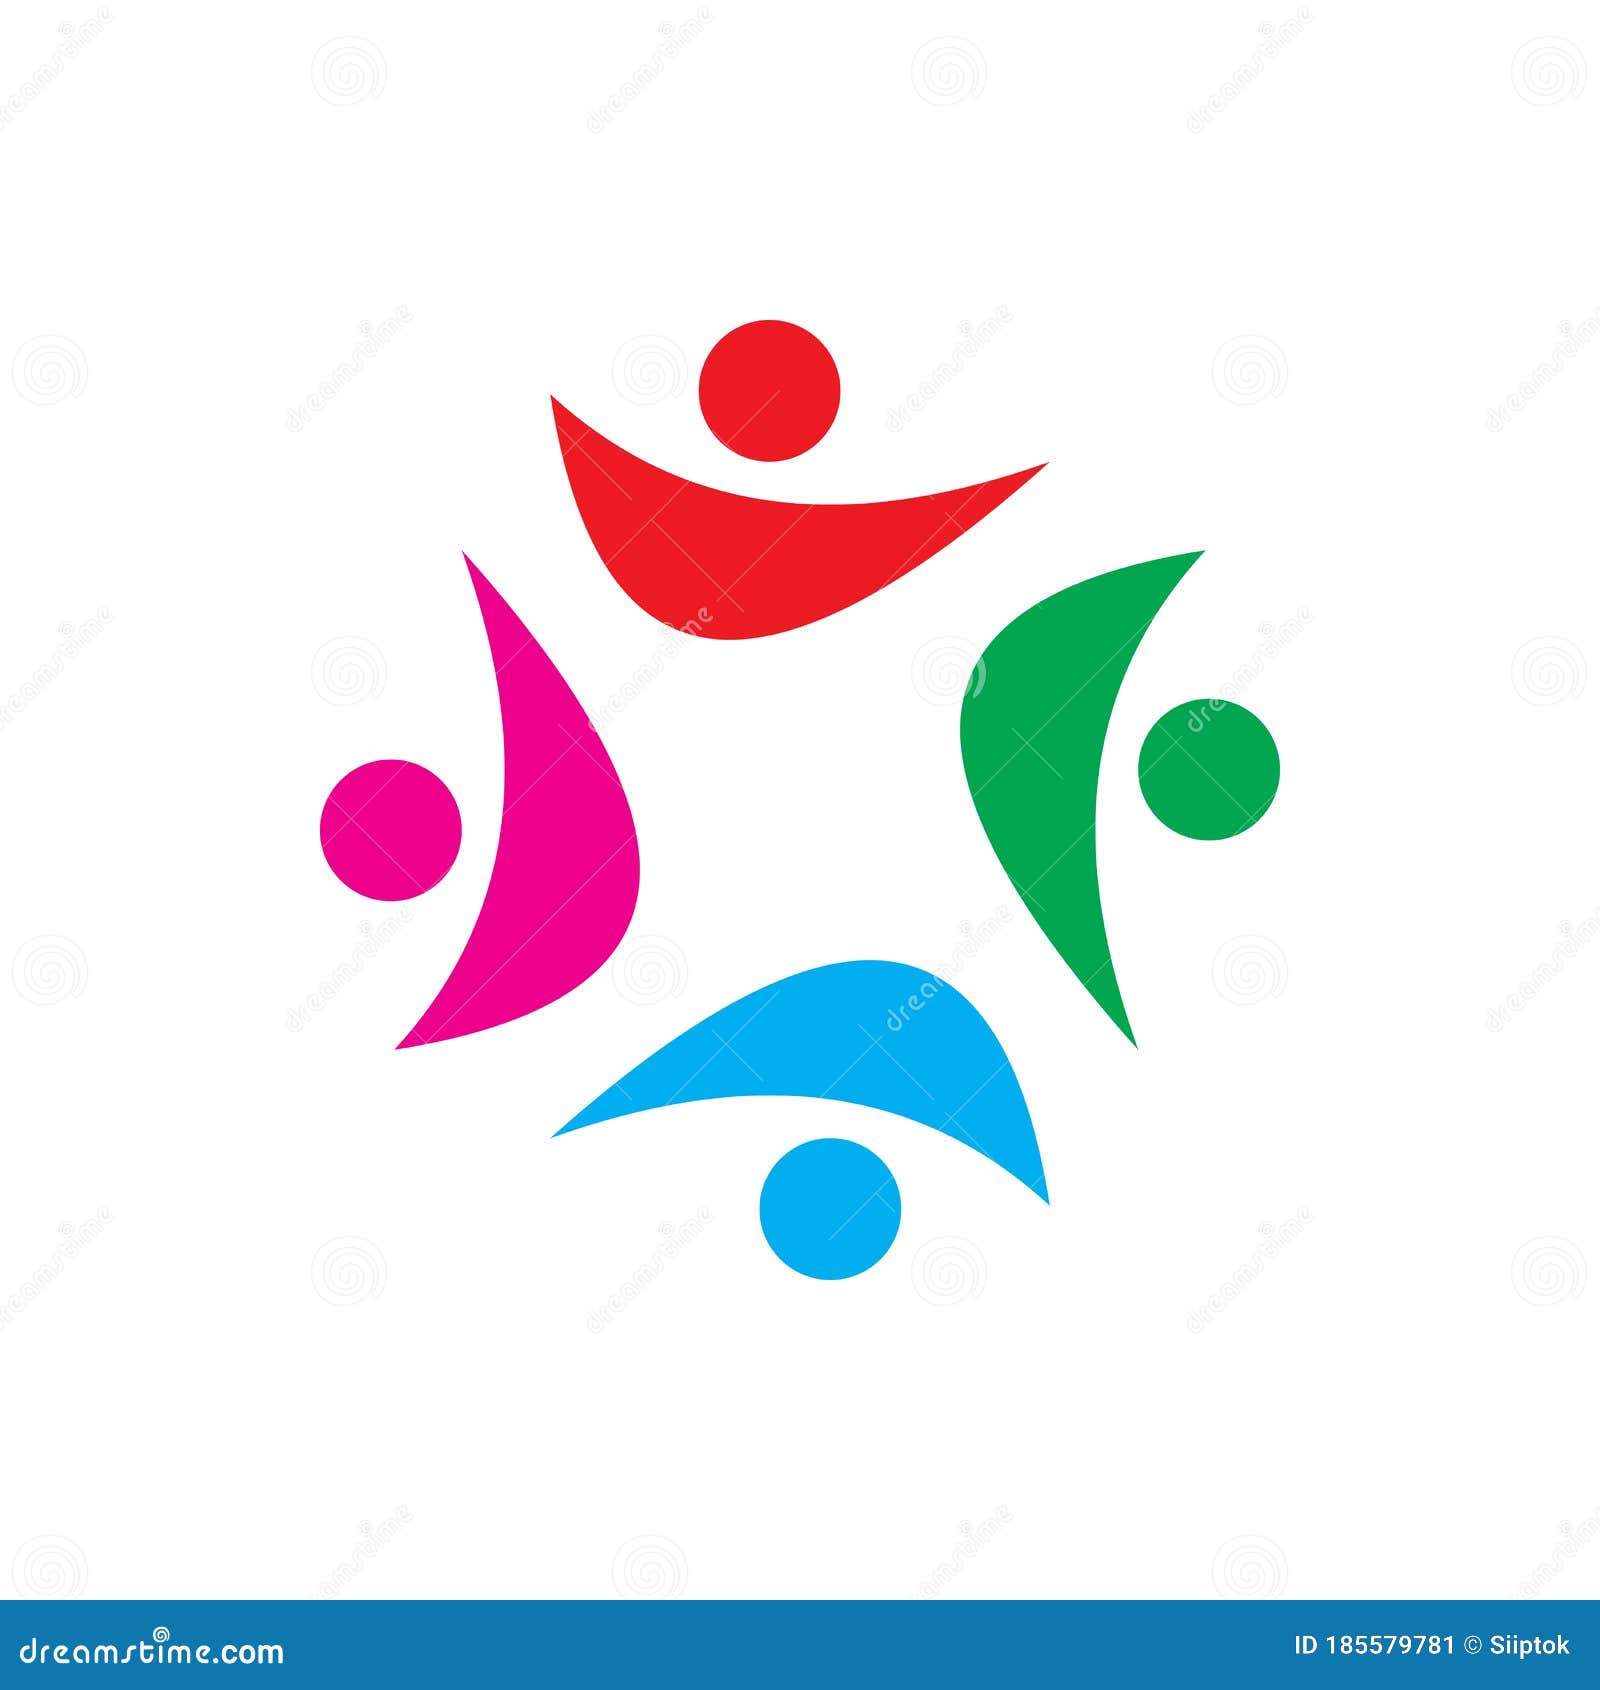 Creative Full Color Community Abstract Group Team People Logo Design ...